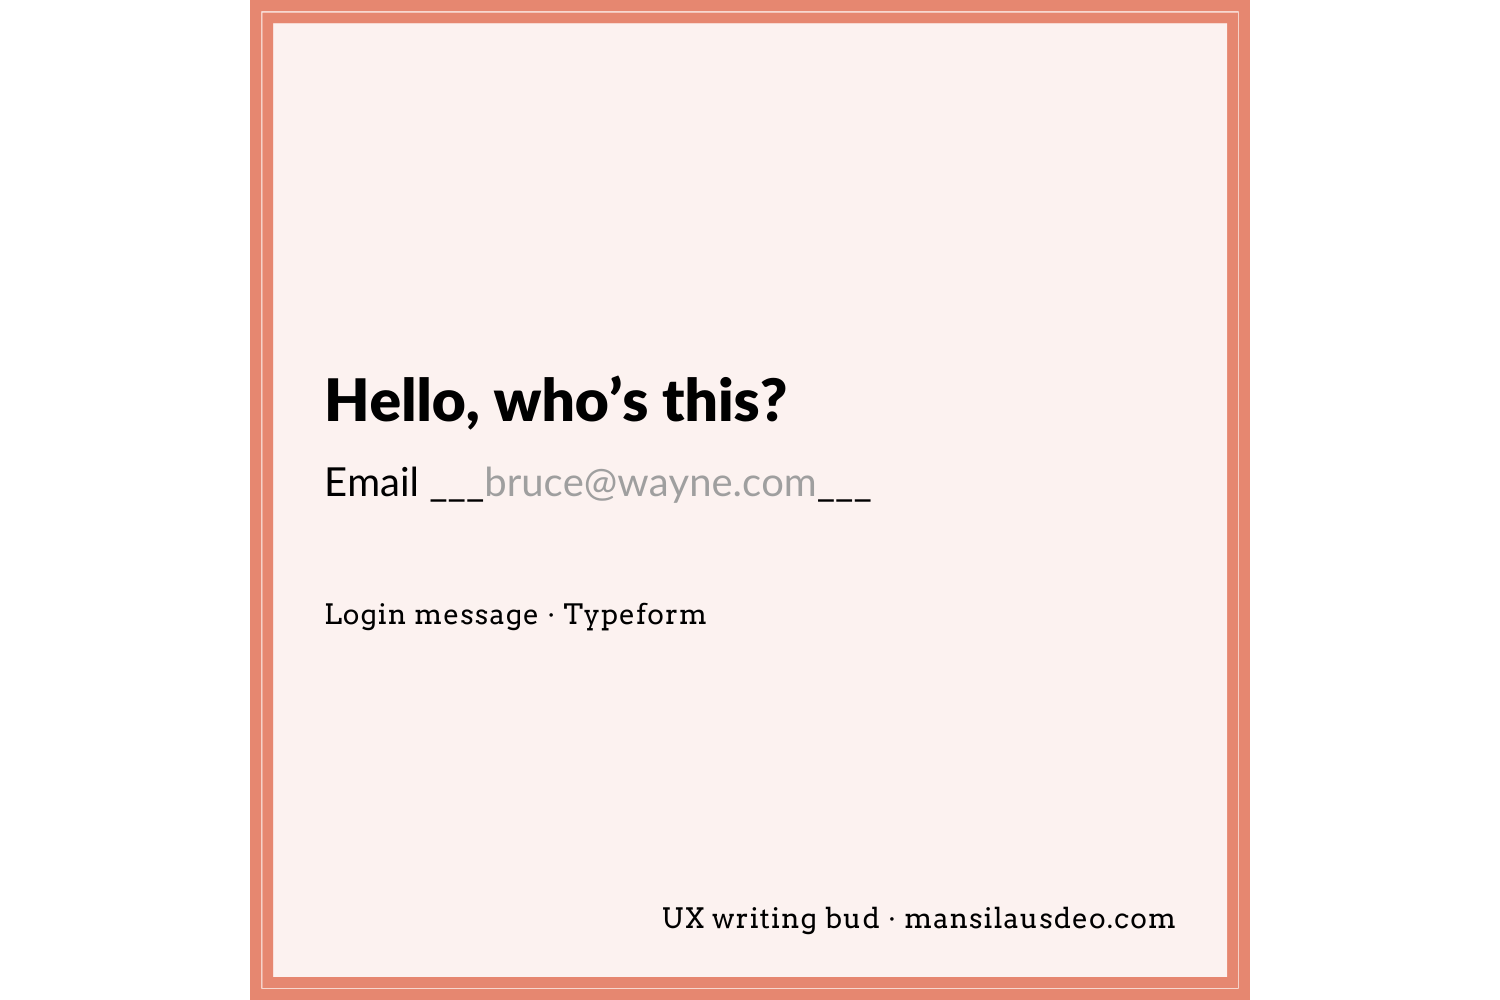 Hello, who's this? login message - typeform UX writing bud